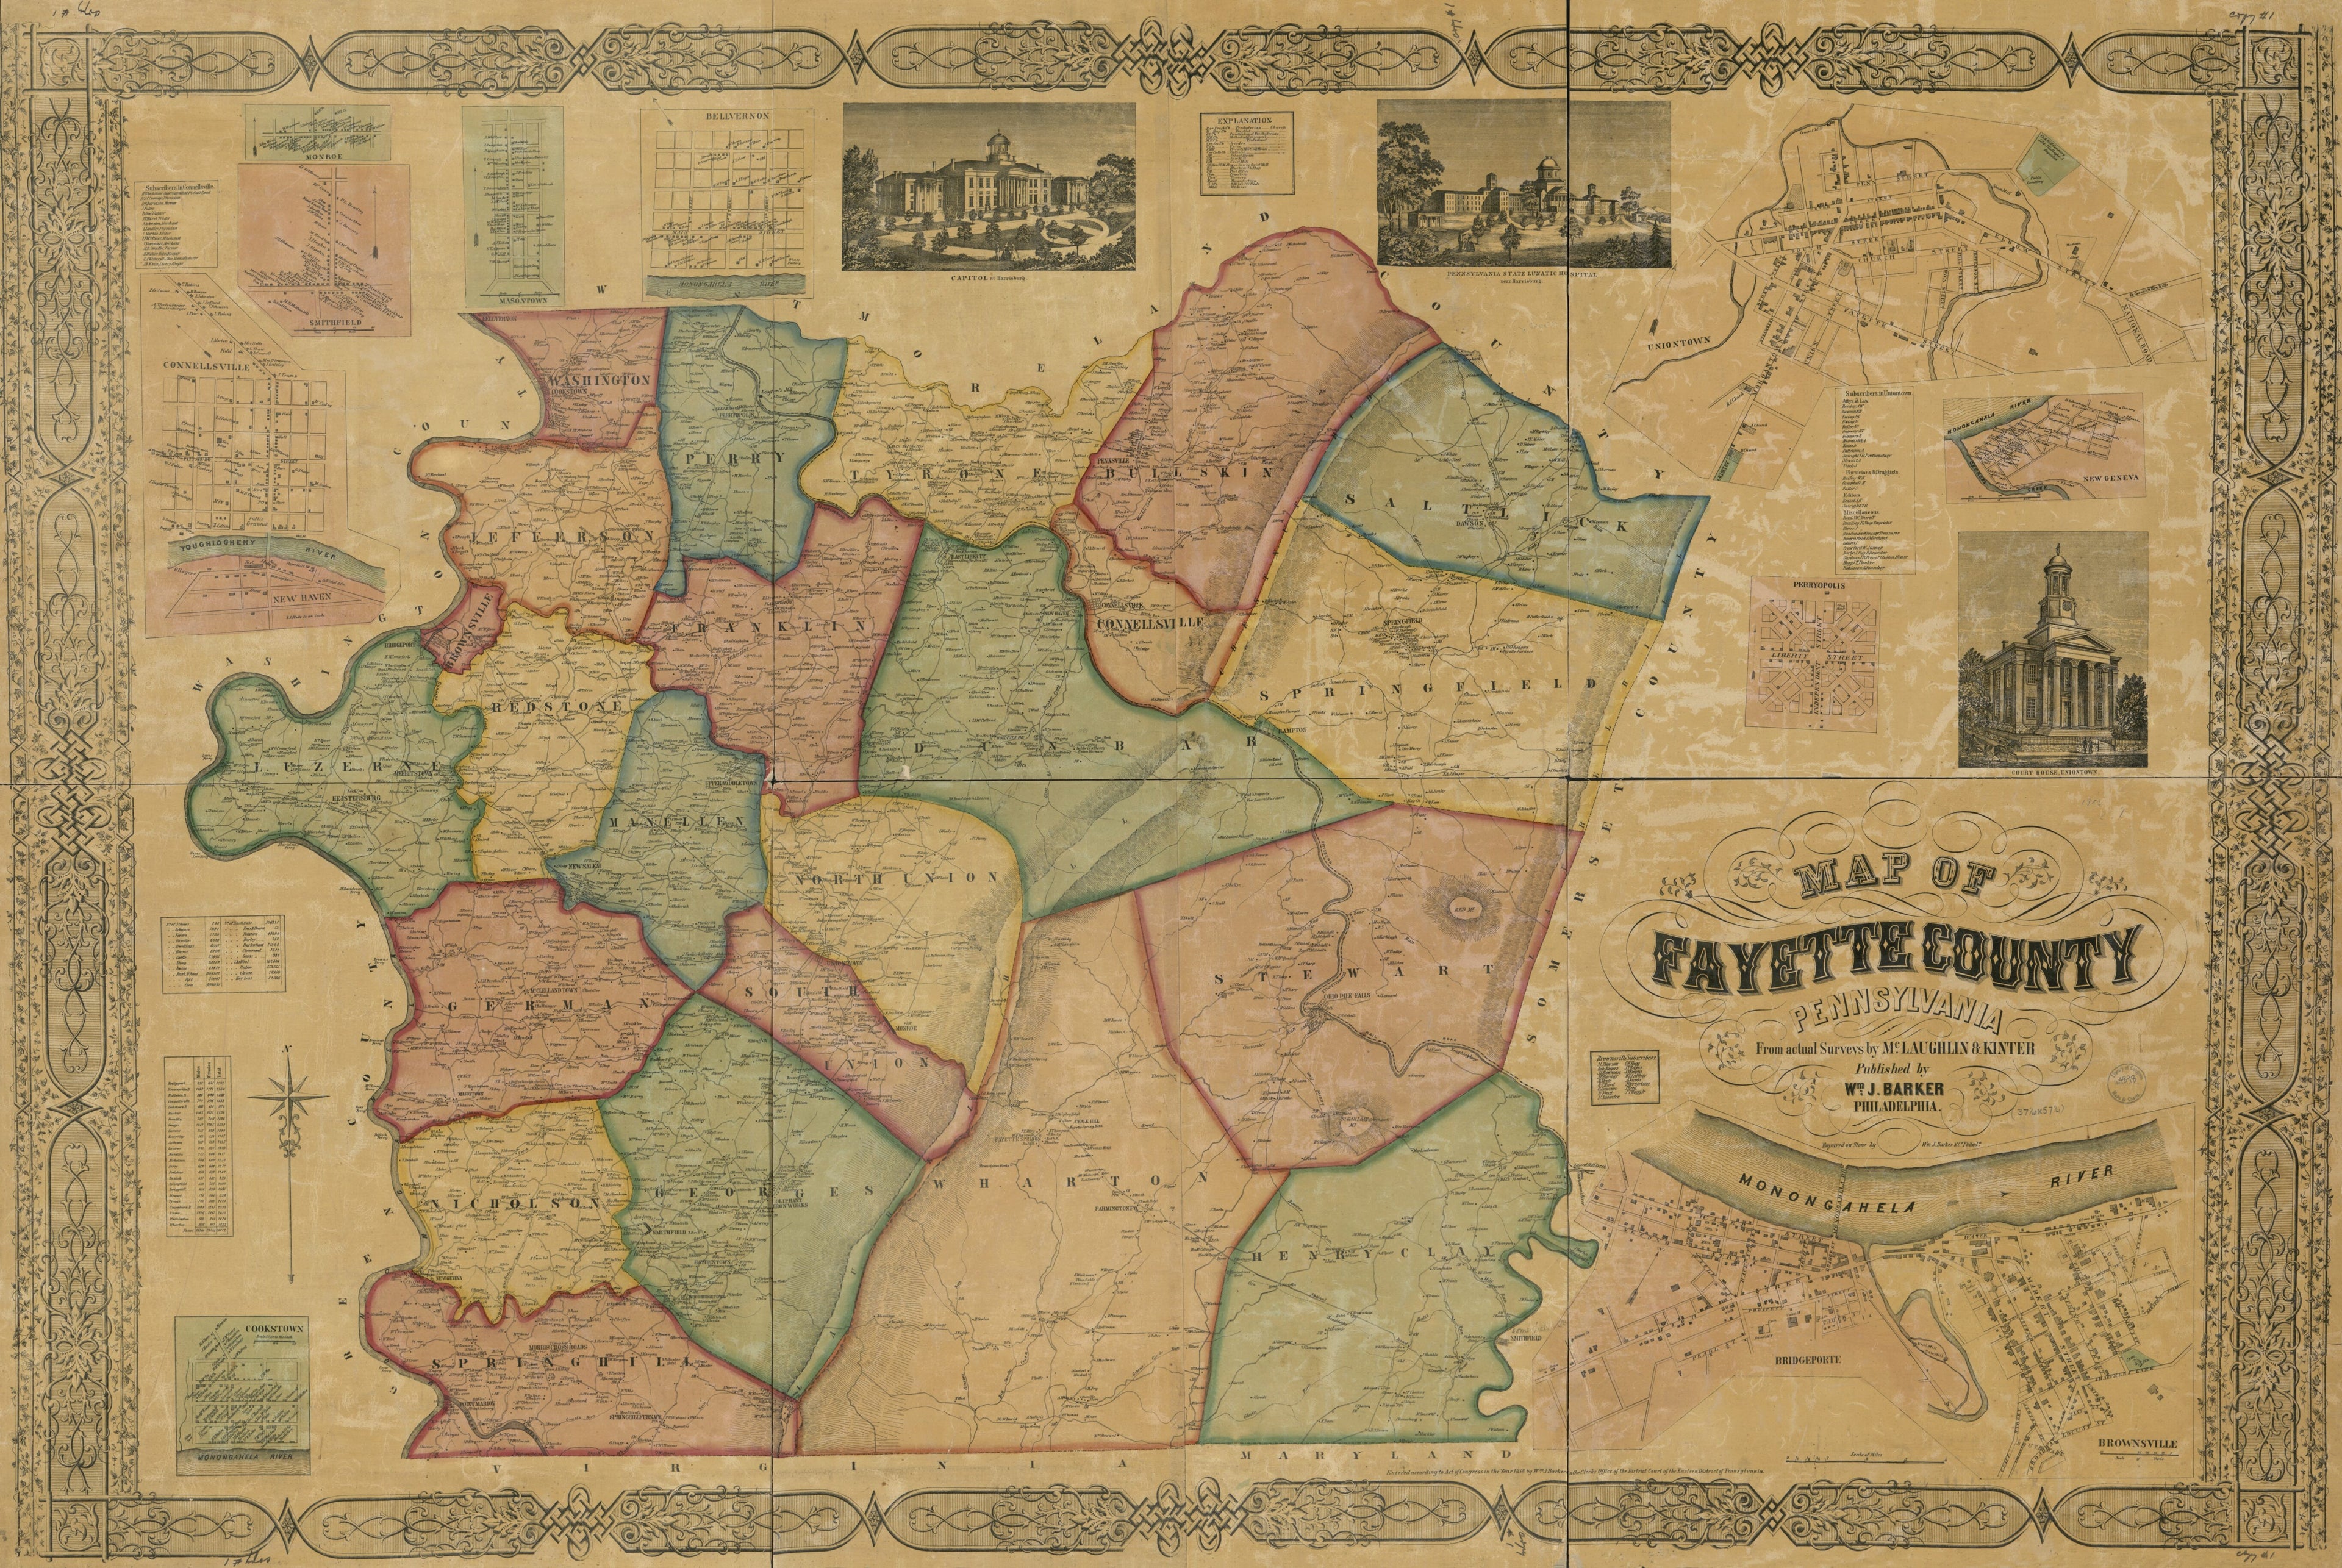 This old map of Map of Fayette County, Pennsylvania : from Actual Surveys from 1858 was created by Wm. J. (William J.) Barker,  McLaughlin &amp; Kinter,  Wm. J. Barker &amp; Co in 1858